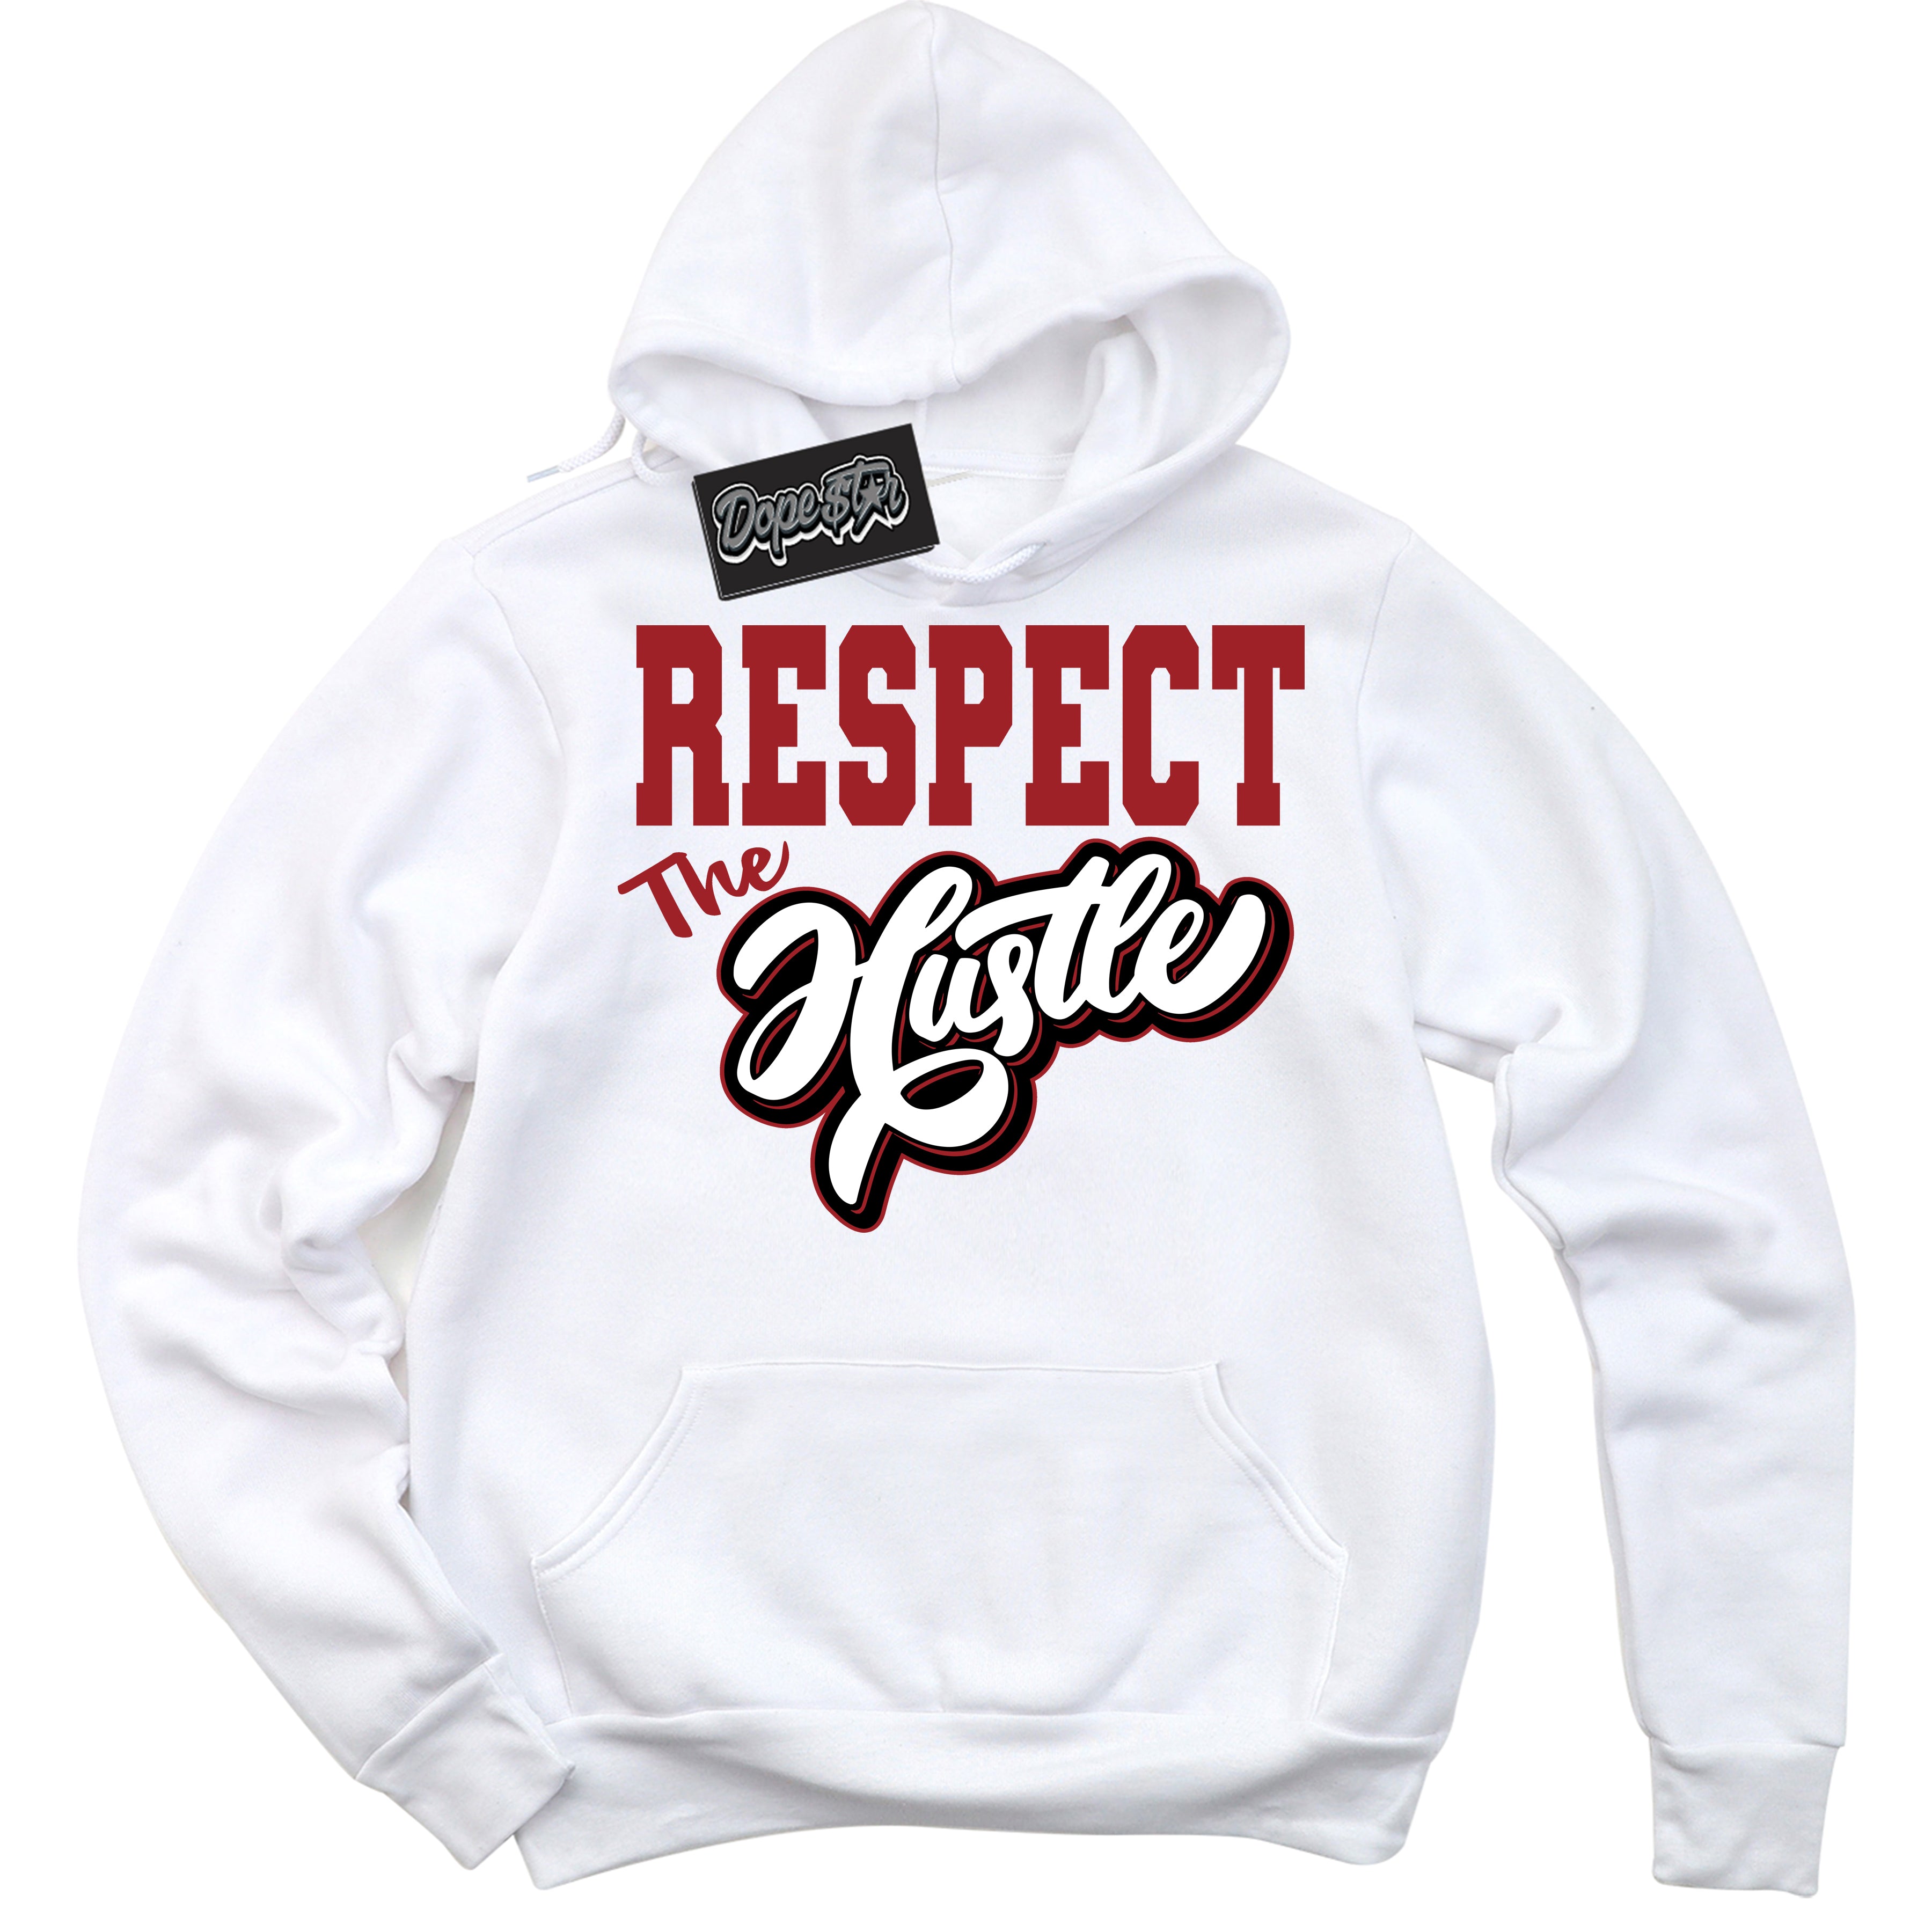 Cool White Hoodie With “ Respect The Hustle “  Design That Perfectly Matches Lost And Found 1s Sneakers.